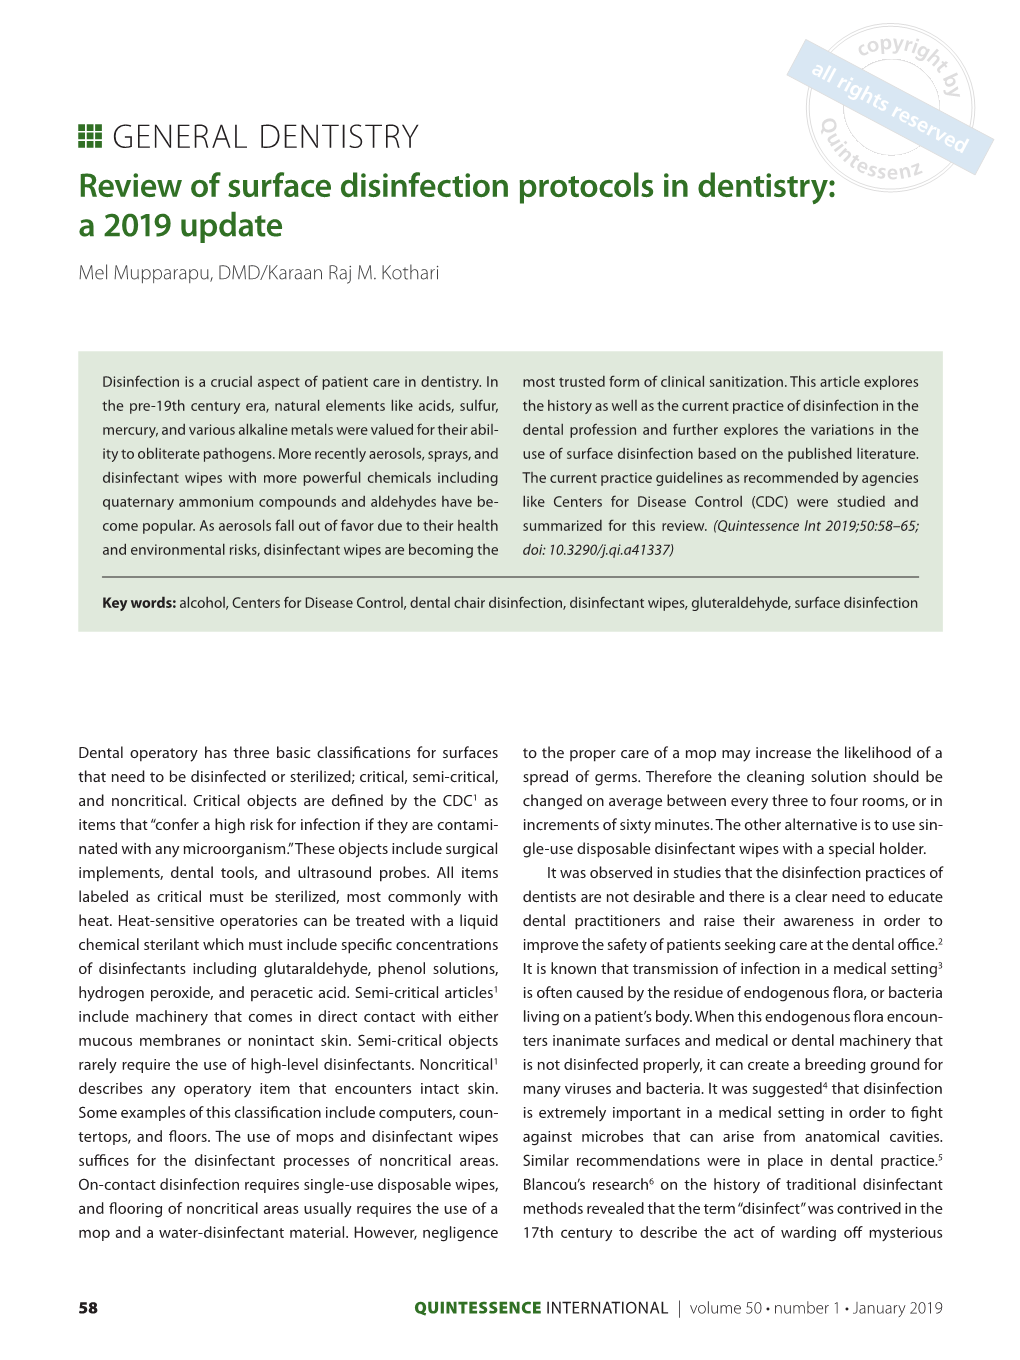 Review of Surface Disinfection Protocols in Dentistry: a 2019 Update